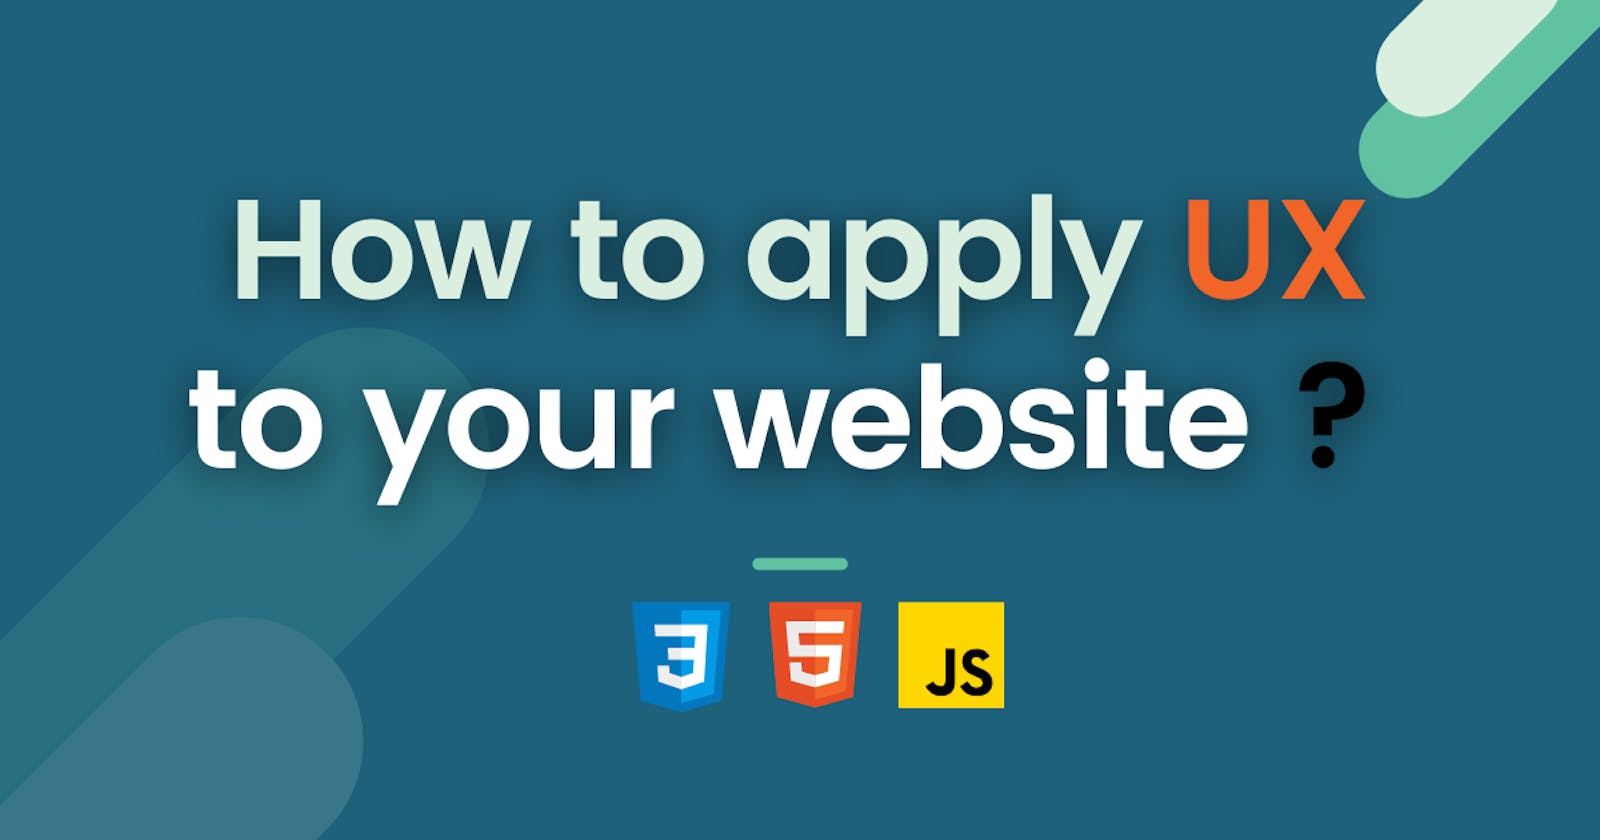 How to apply UX to your website?